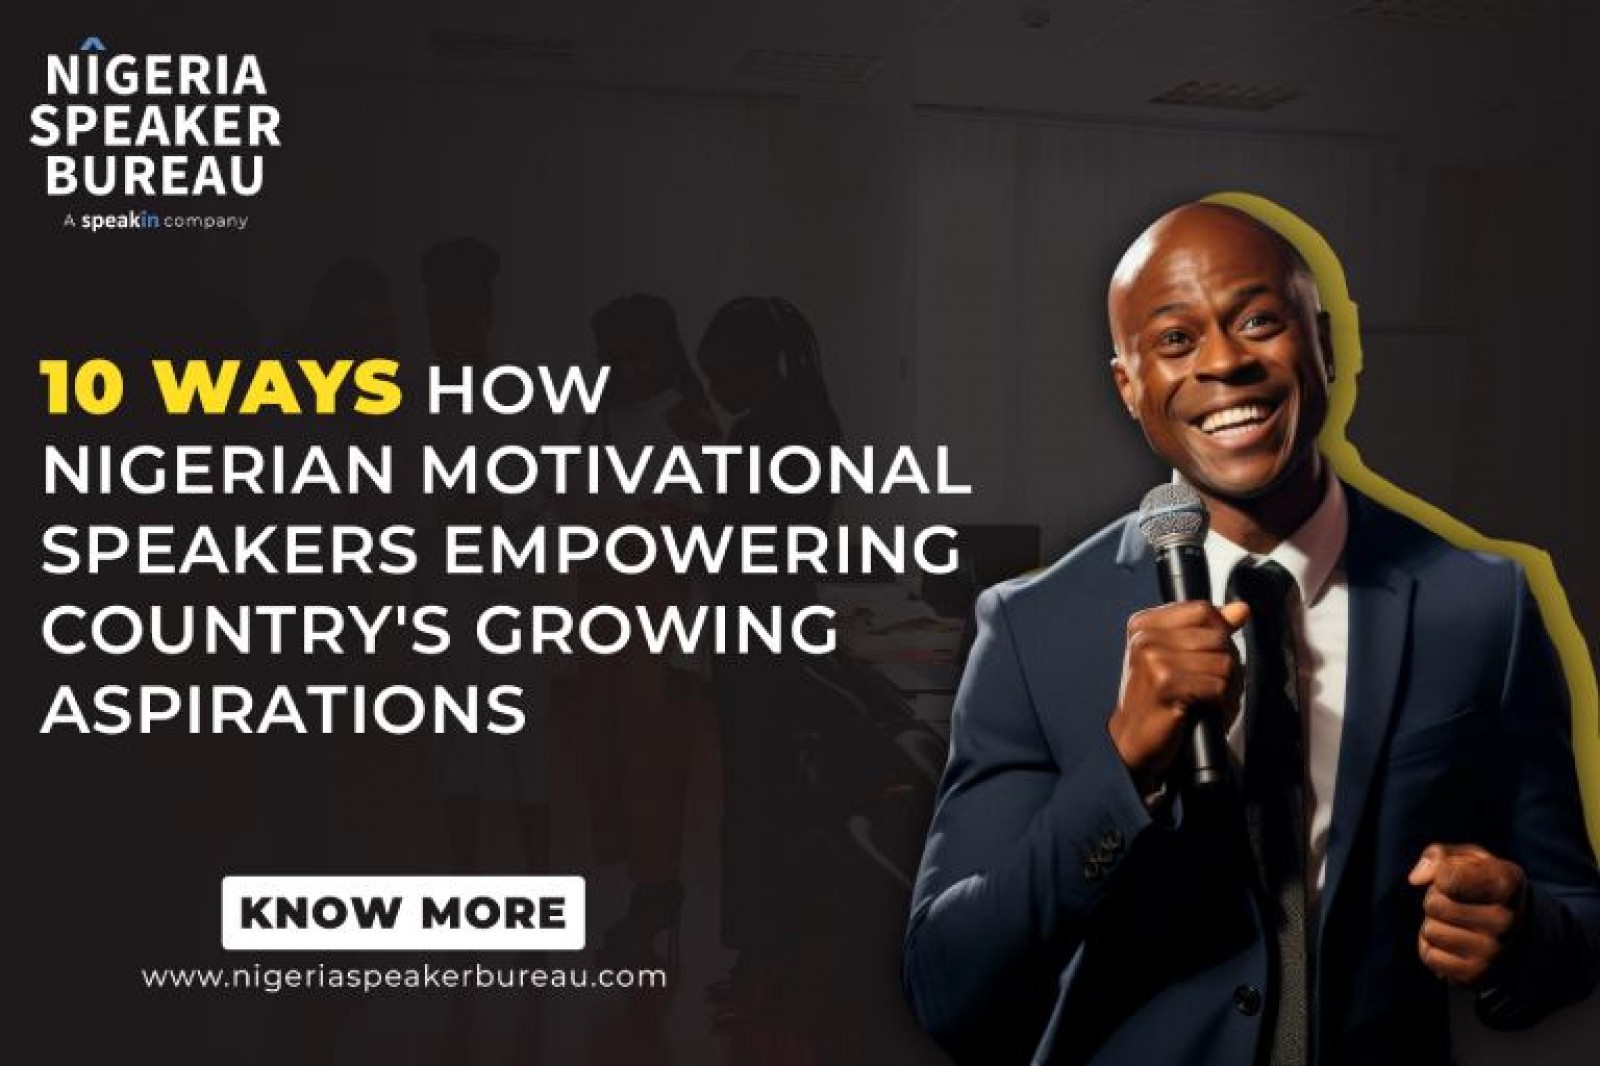 10 Ways How Nigerian Motivational Speakers Empowering Country's Growing Aspirations 